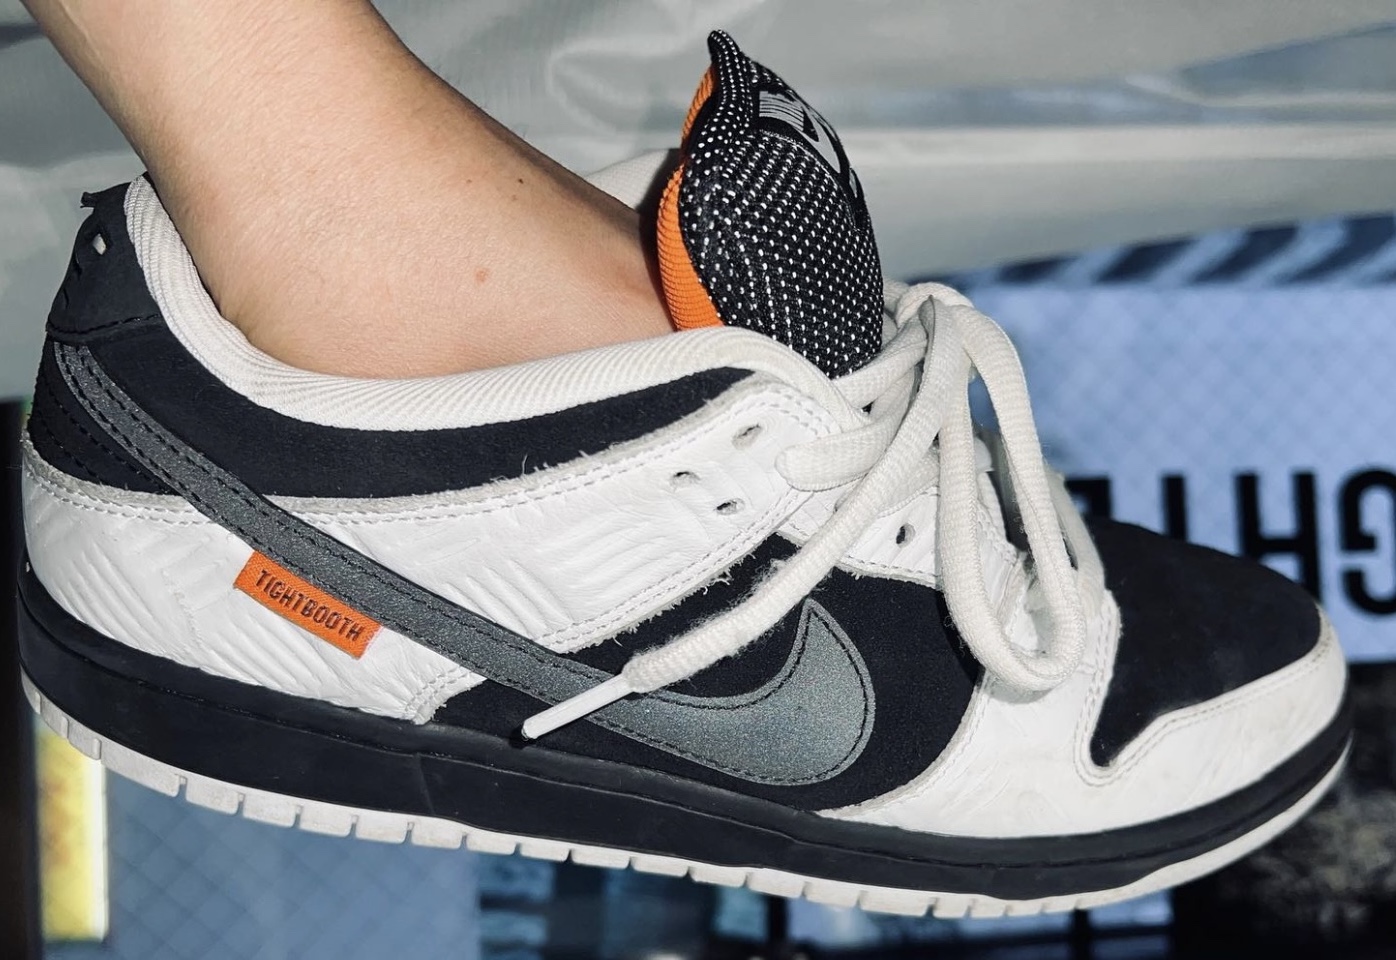 A Better Look at the TIGHTBOOTH x Nike SB Dunk Low